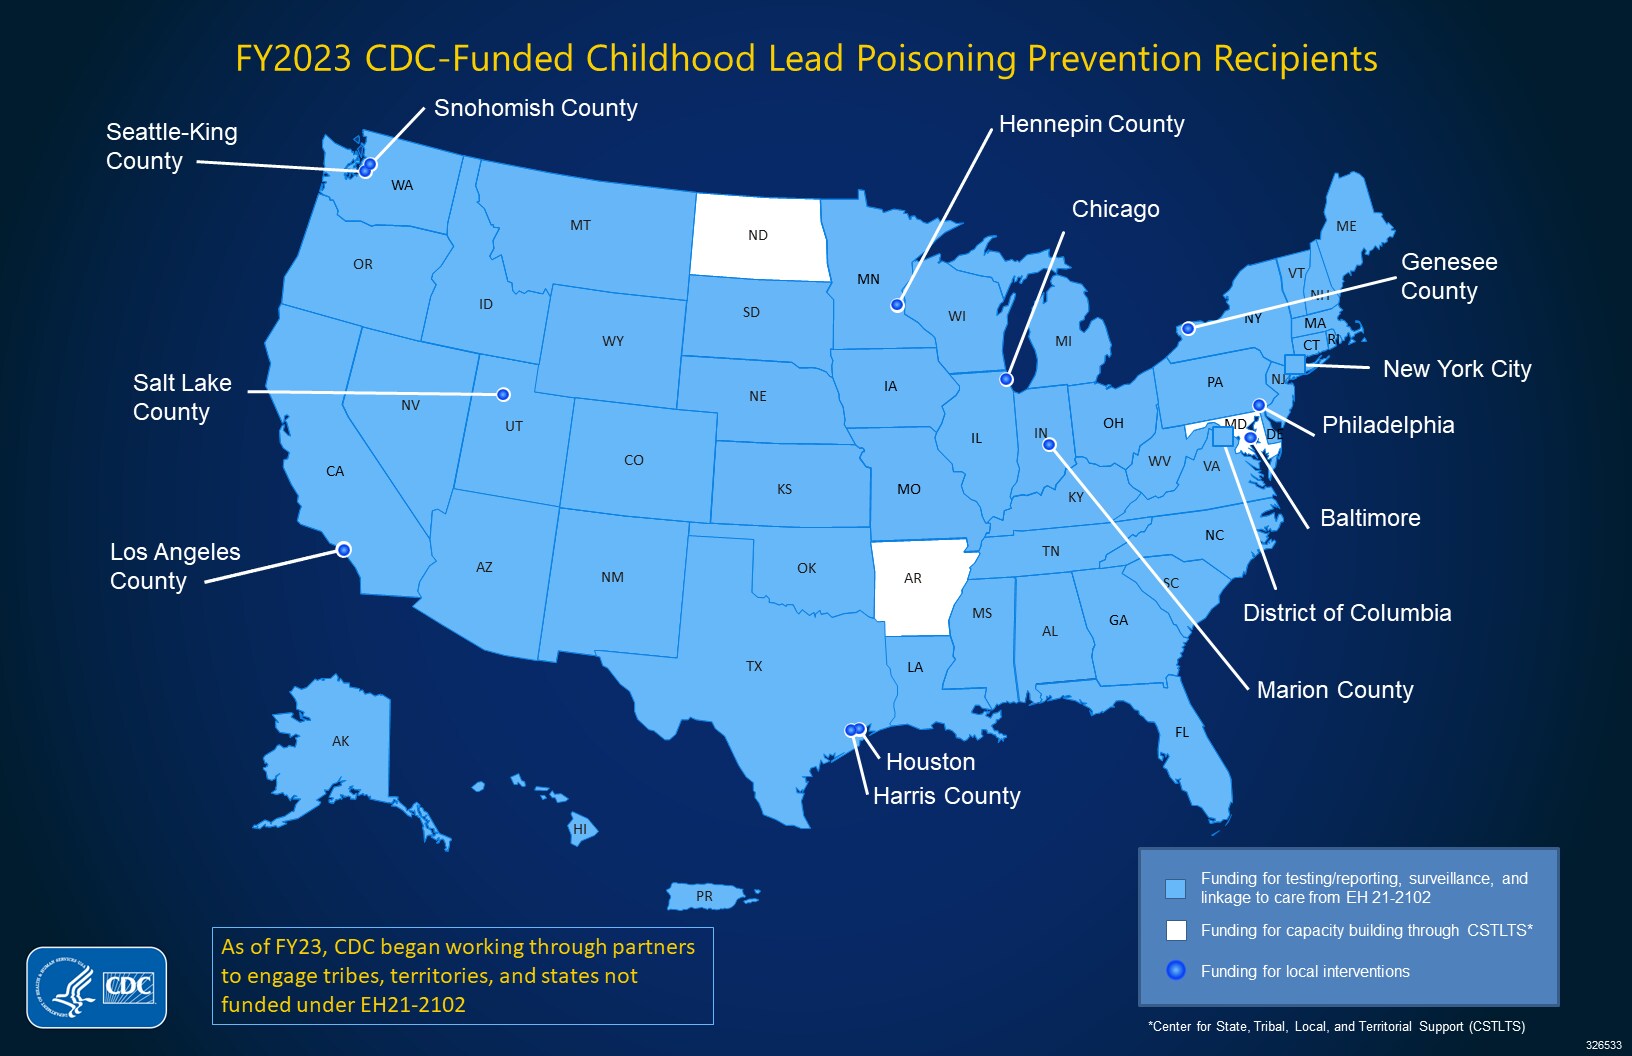 Map of states and cities in the United States who received funding from CDC for childhood lead poisoning prevention activities in 2023.